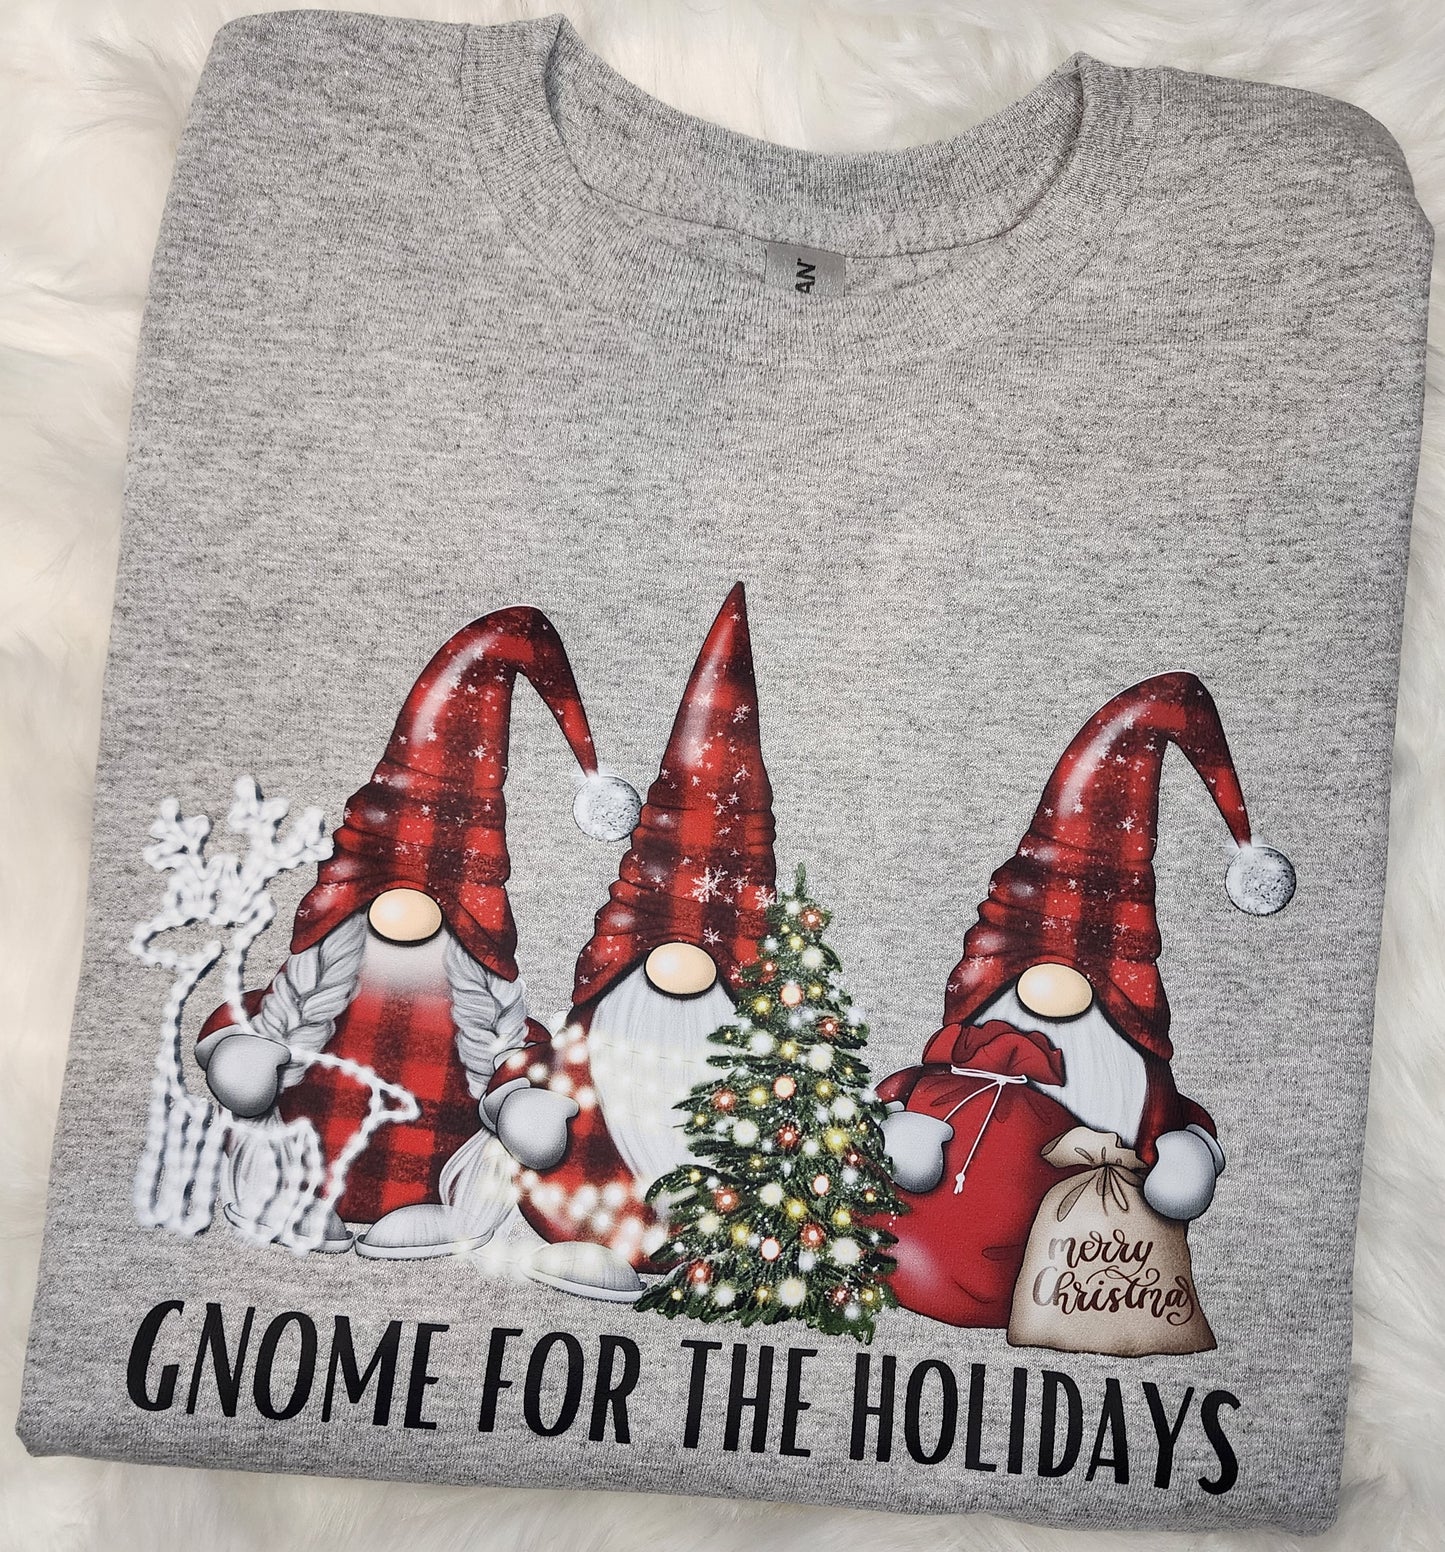 Gnome for the Holidays